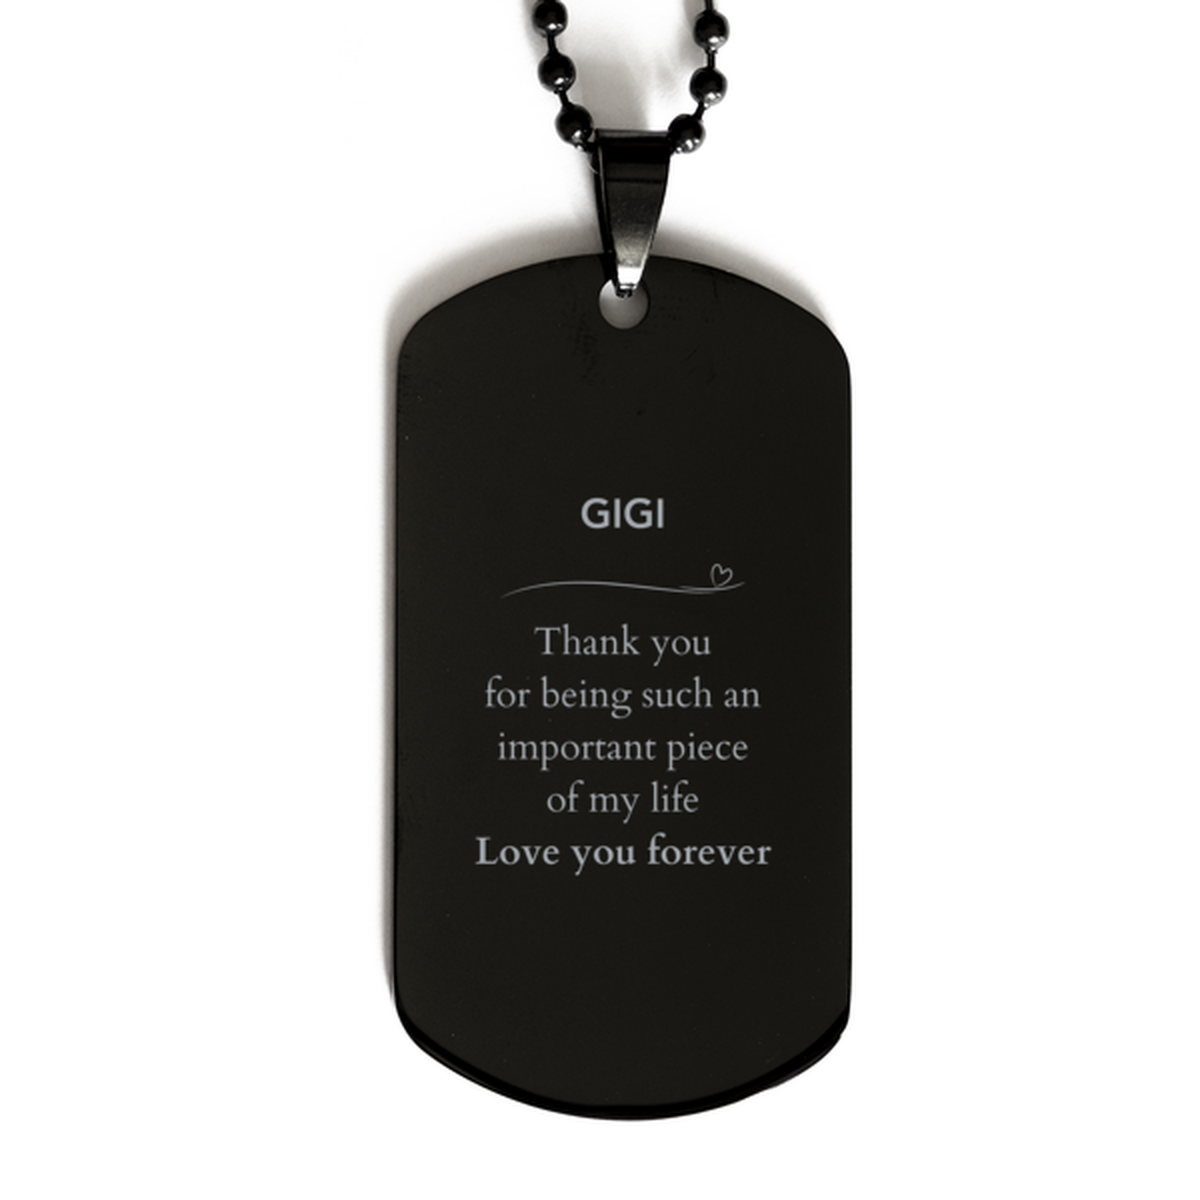 Appropriate Gigi Black Dog Tag Epic Birthday Gifts for Gigi Thank you for being such an important piece of my life Gigi Christmas Mothers Fathers Day